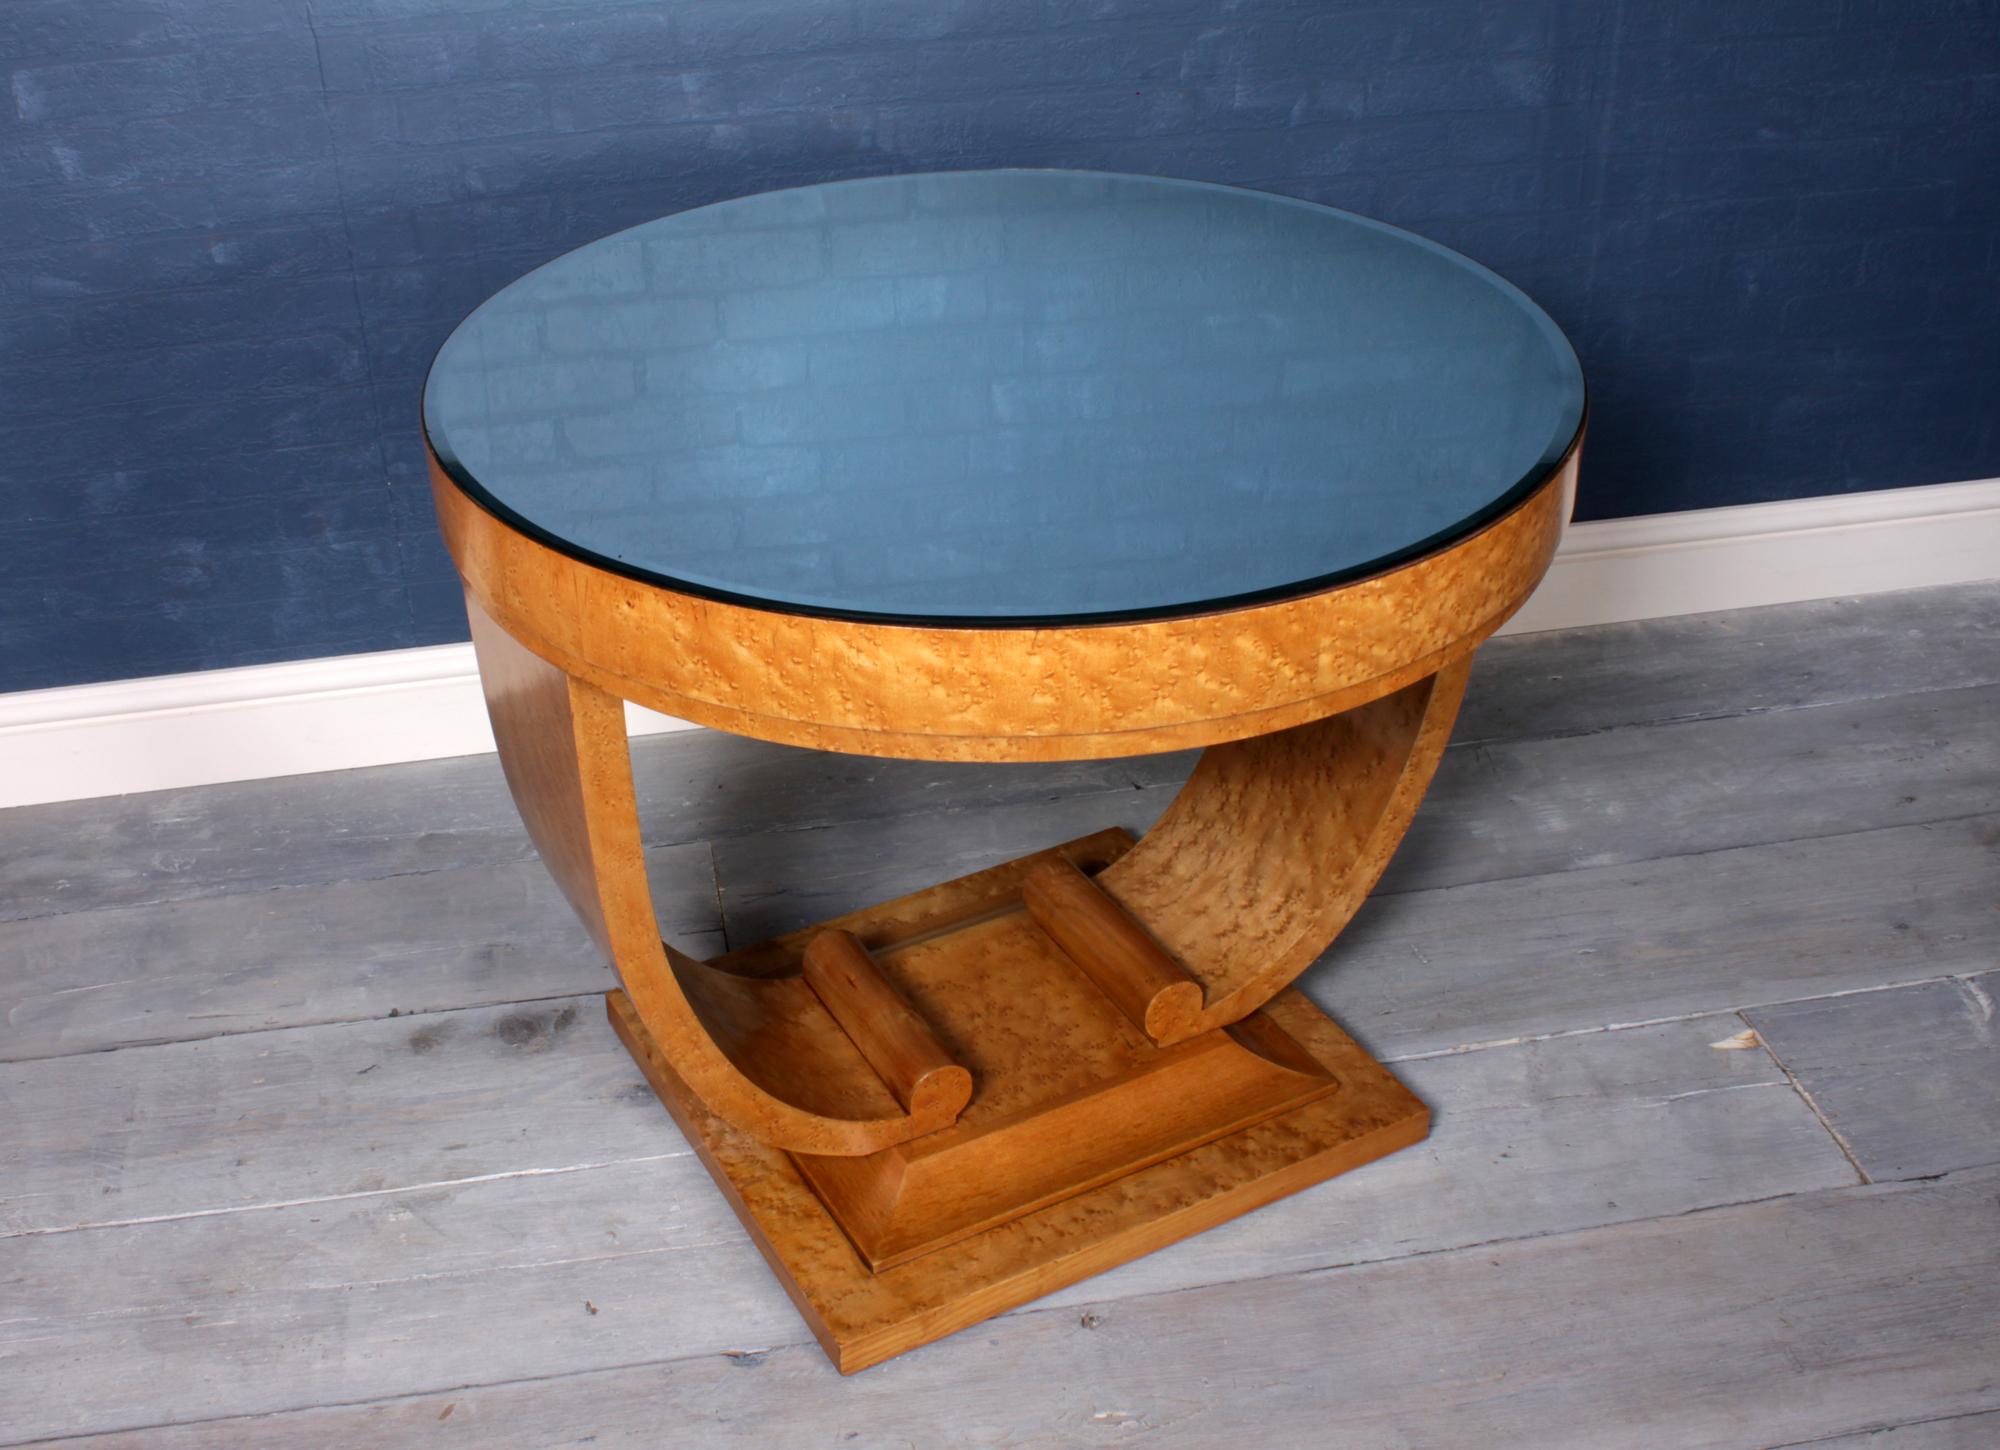 Art Deco coffee table in bird's-eye maple, circa 1930
An Art Deco coffee table with U-base in bird's-eye maple on solid chestnut, the table is of excellent quality and has been full re polished the bevelled mirror top has a few signs of